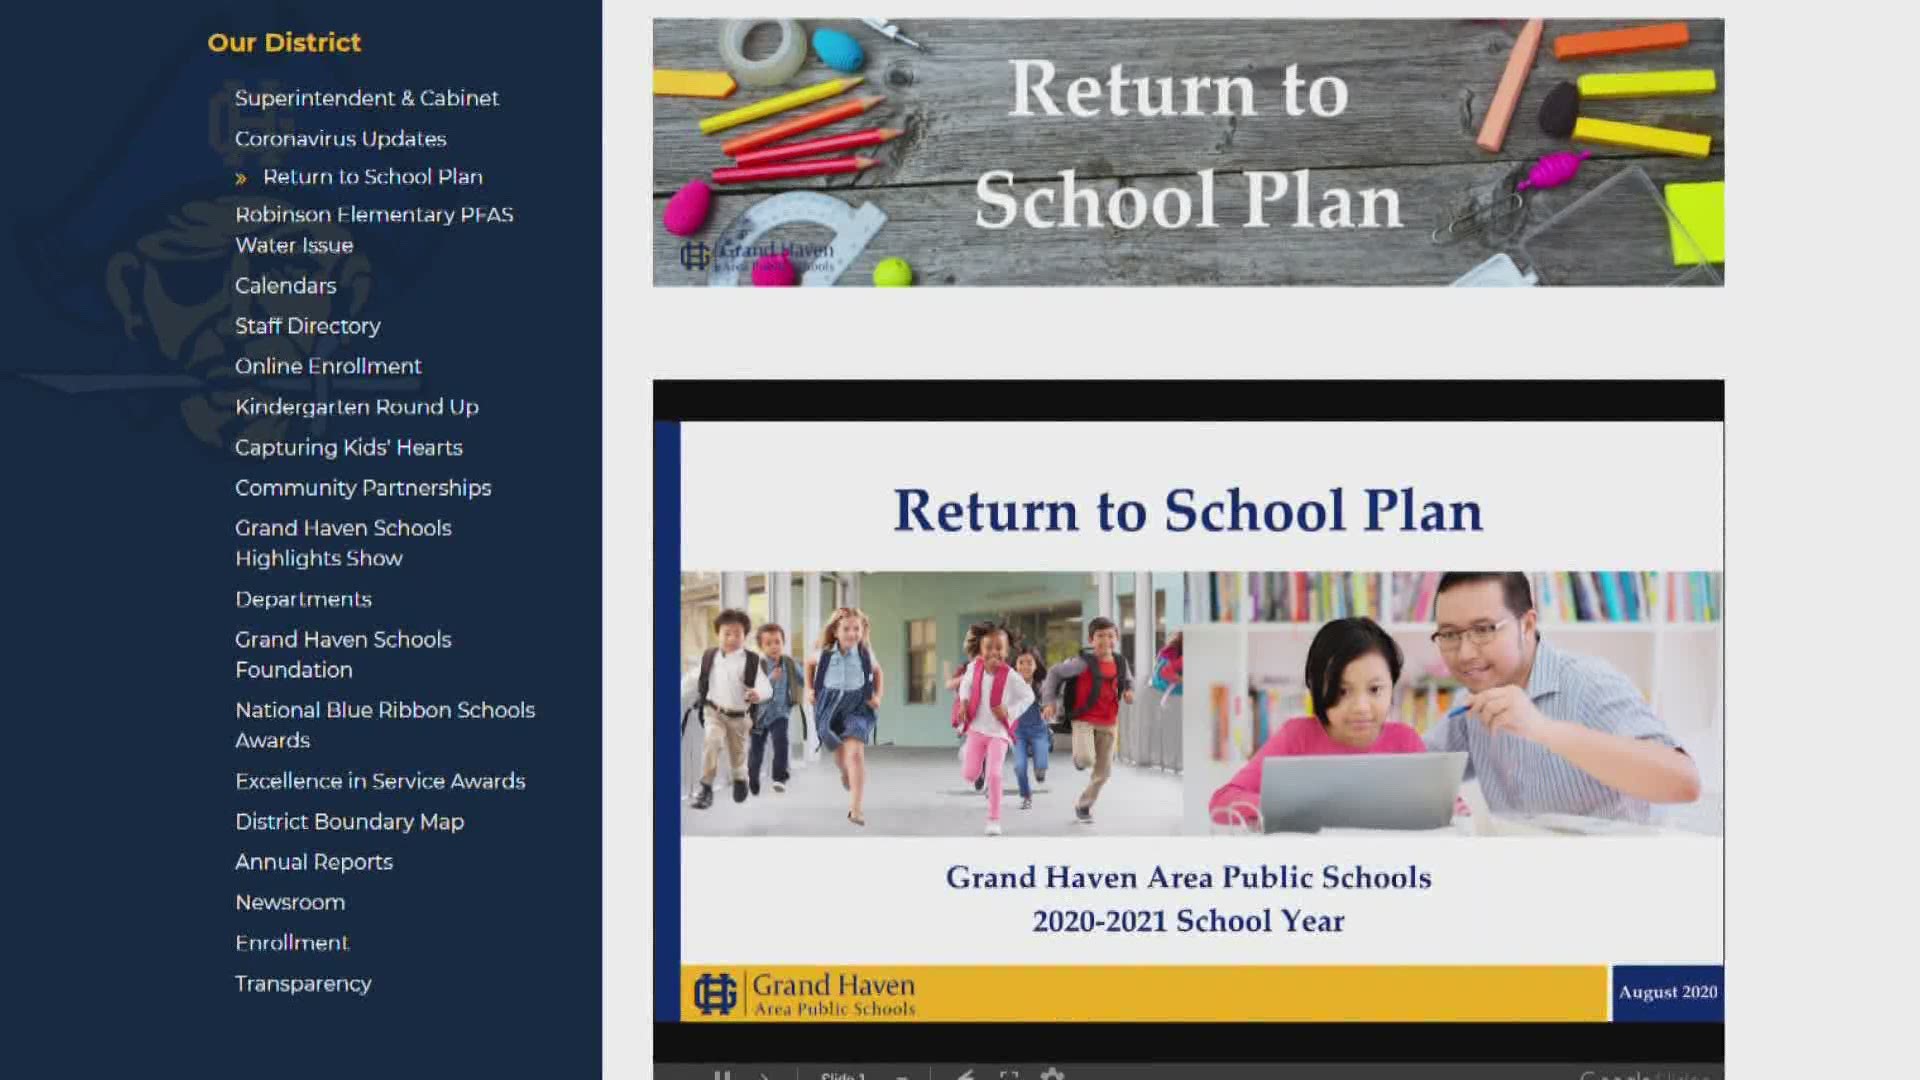 Grand Haven Area Public Schools offers two back-to-school options